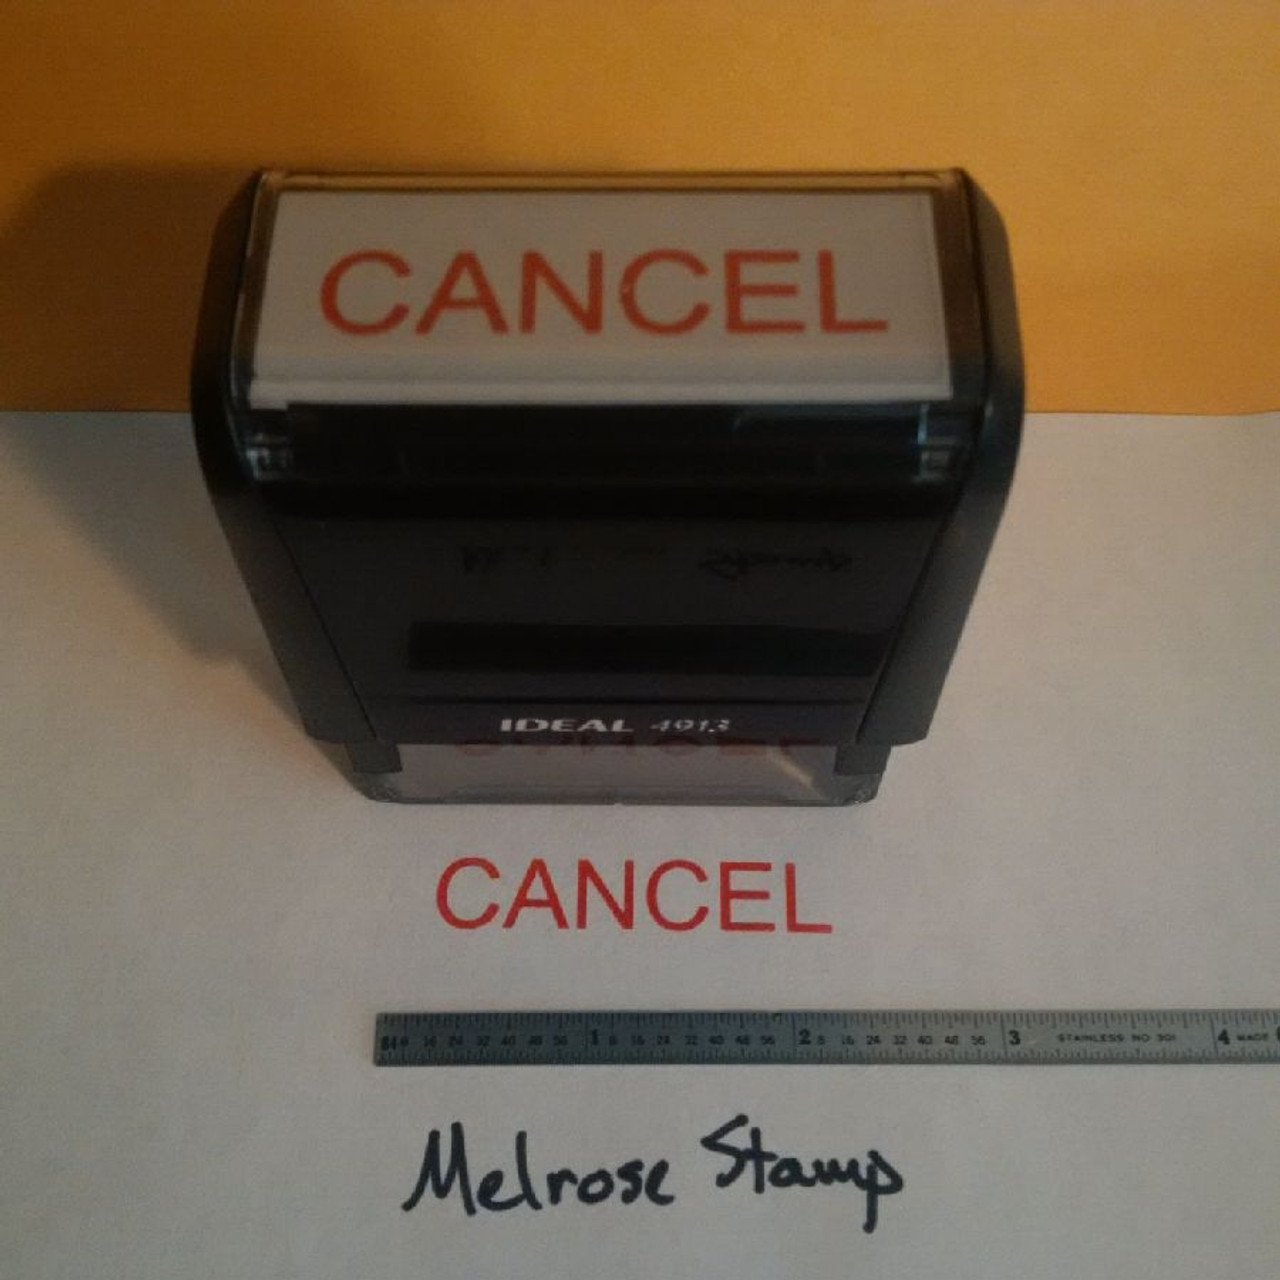 CANCEL Rubber Stamp for office use self-inking